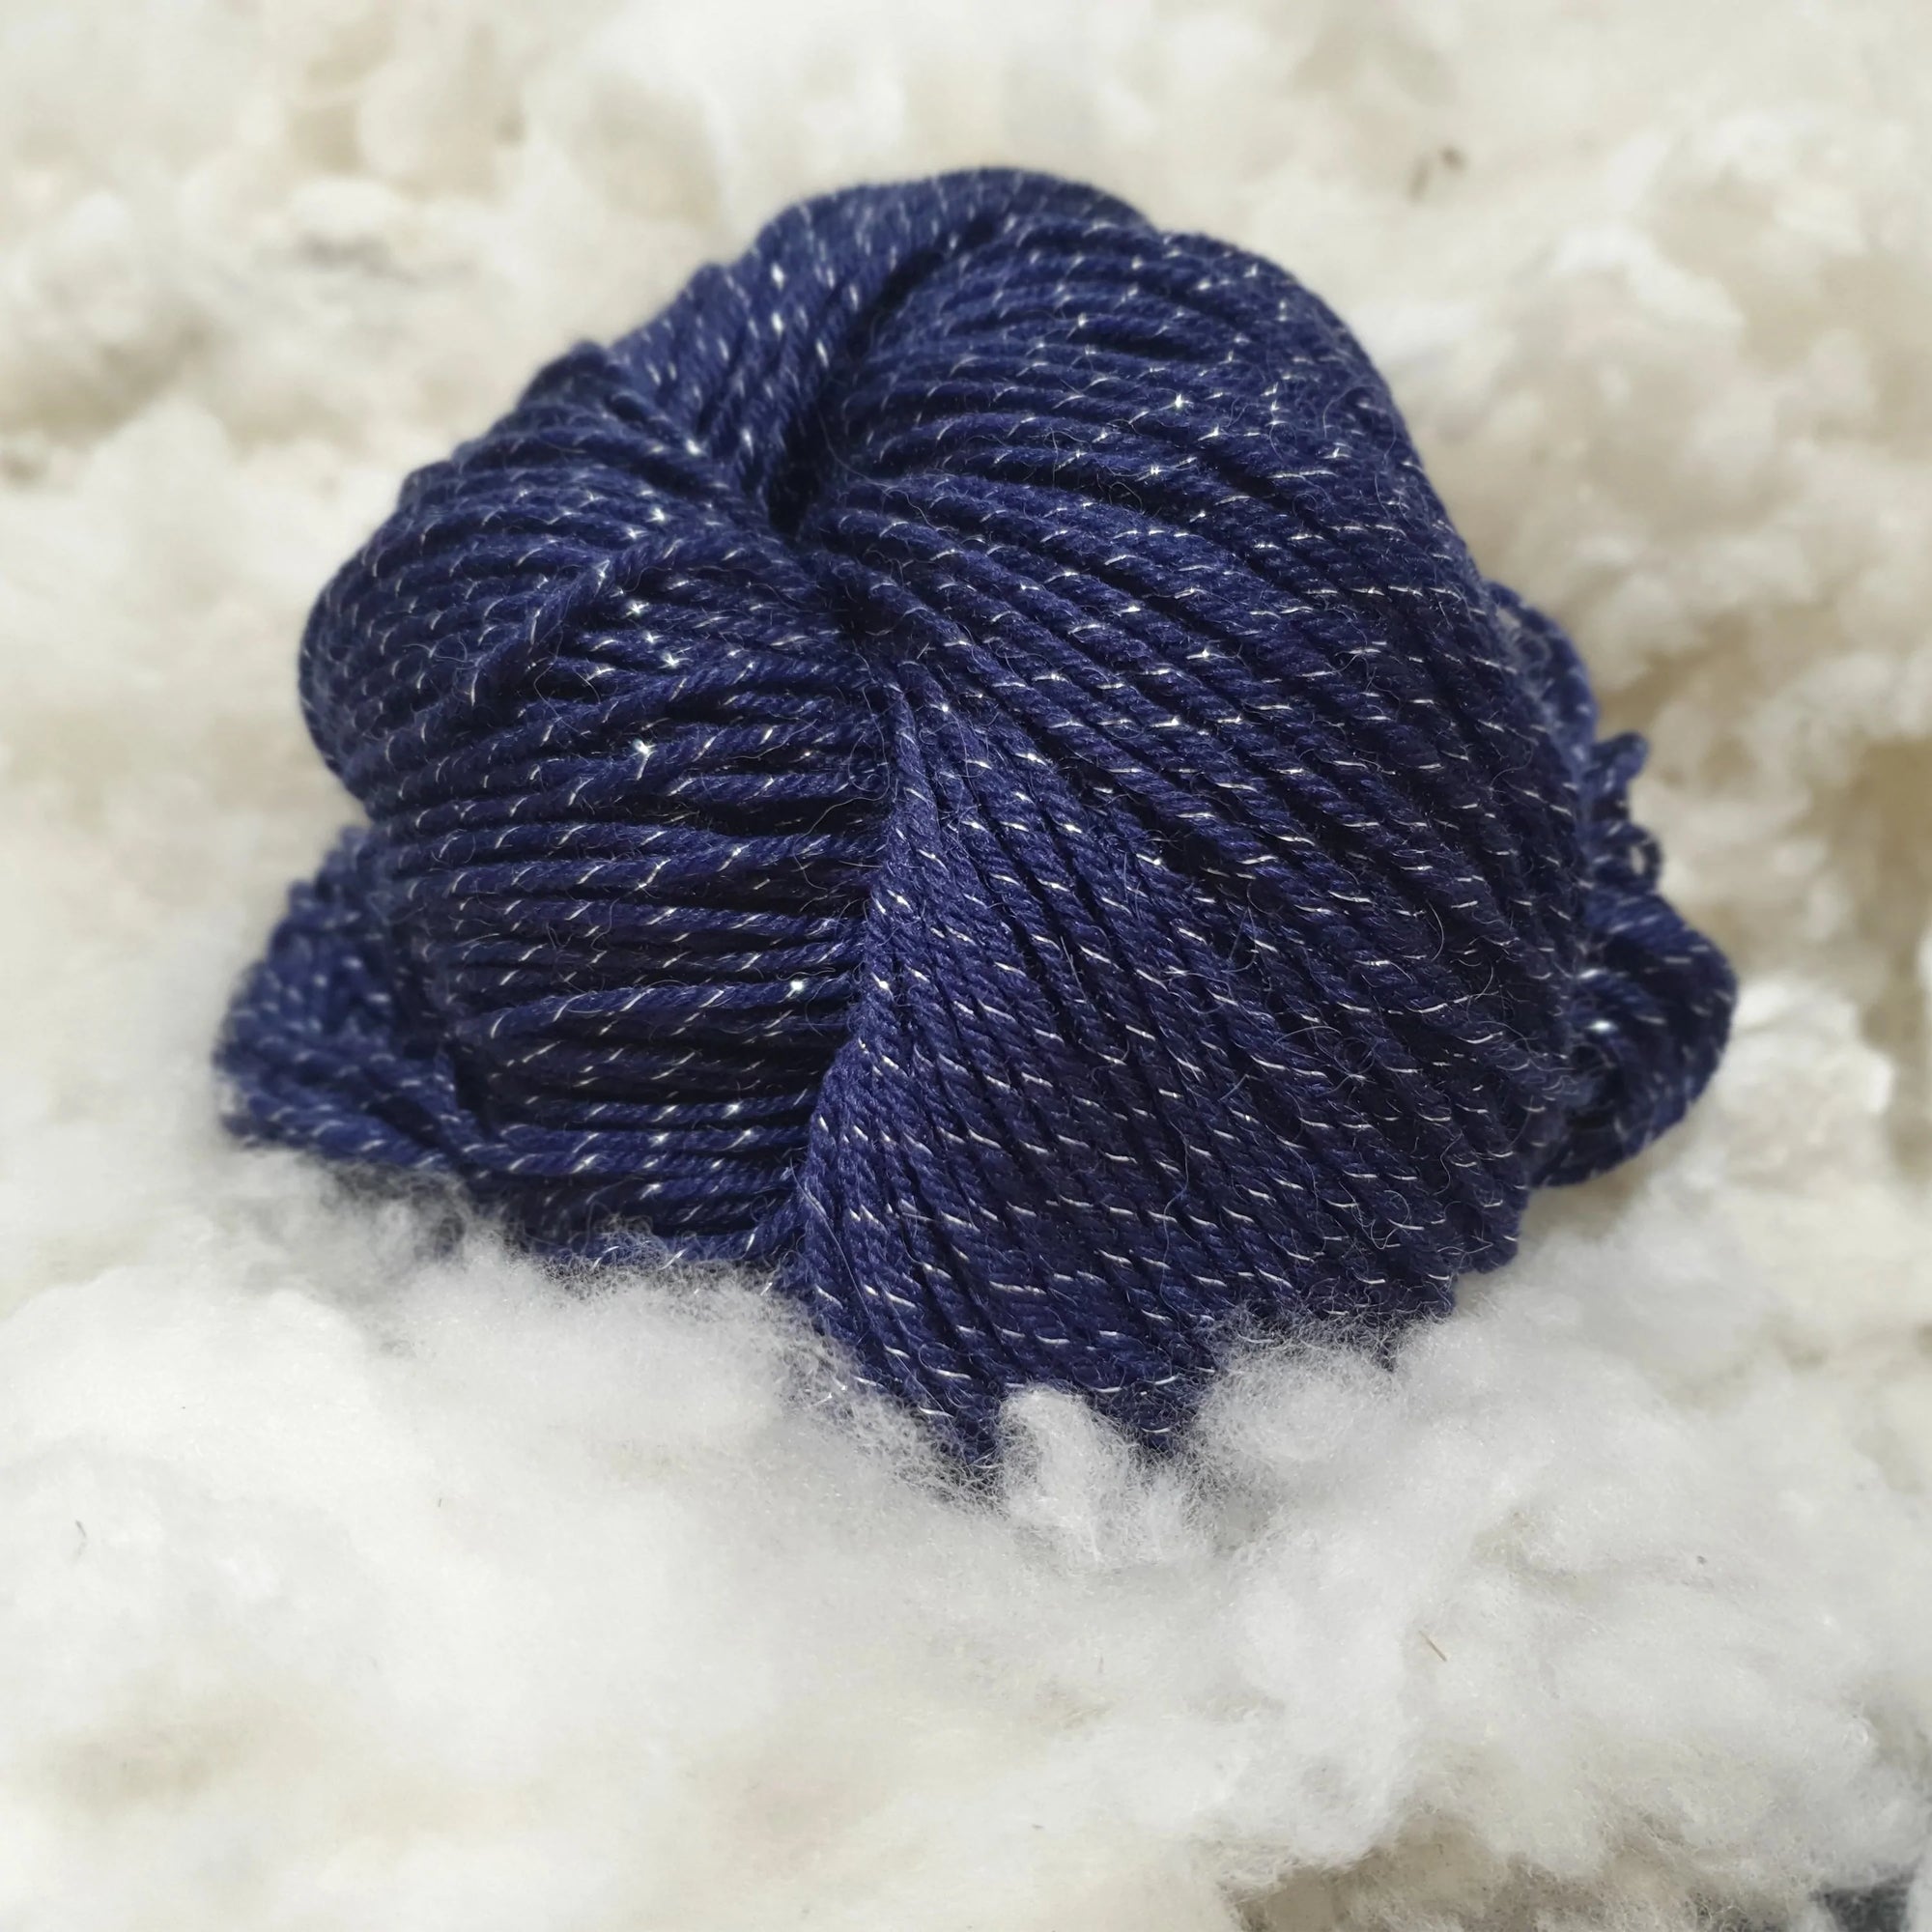 Nundle Dyed Metallica Yarn 4ply Equivalent - Midnight